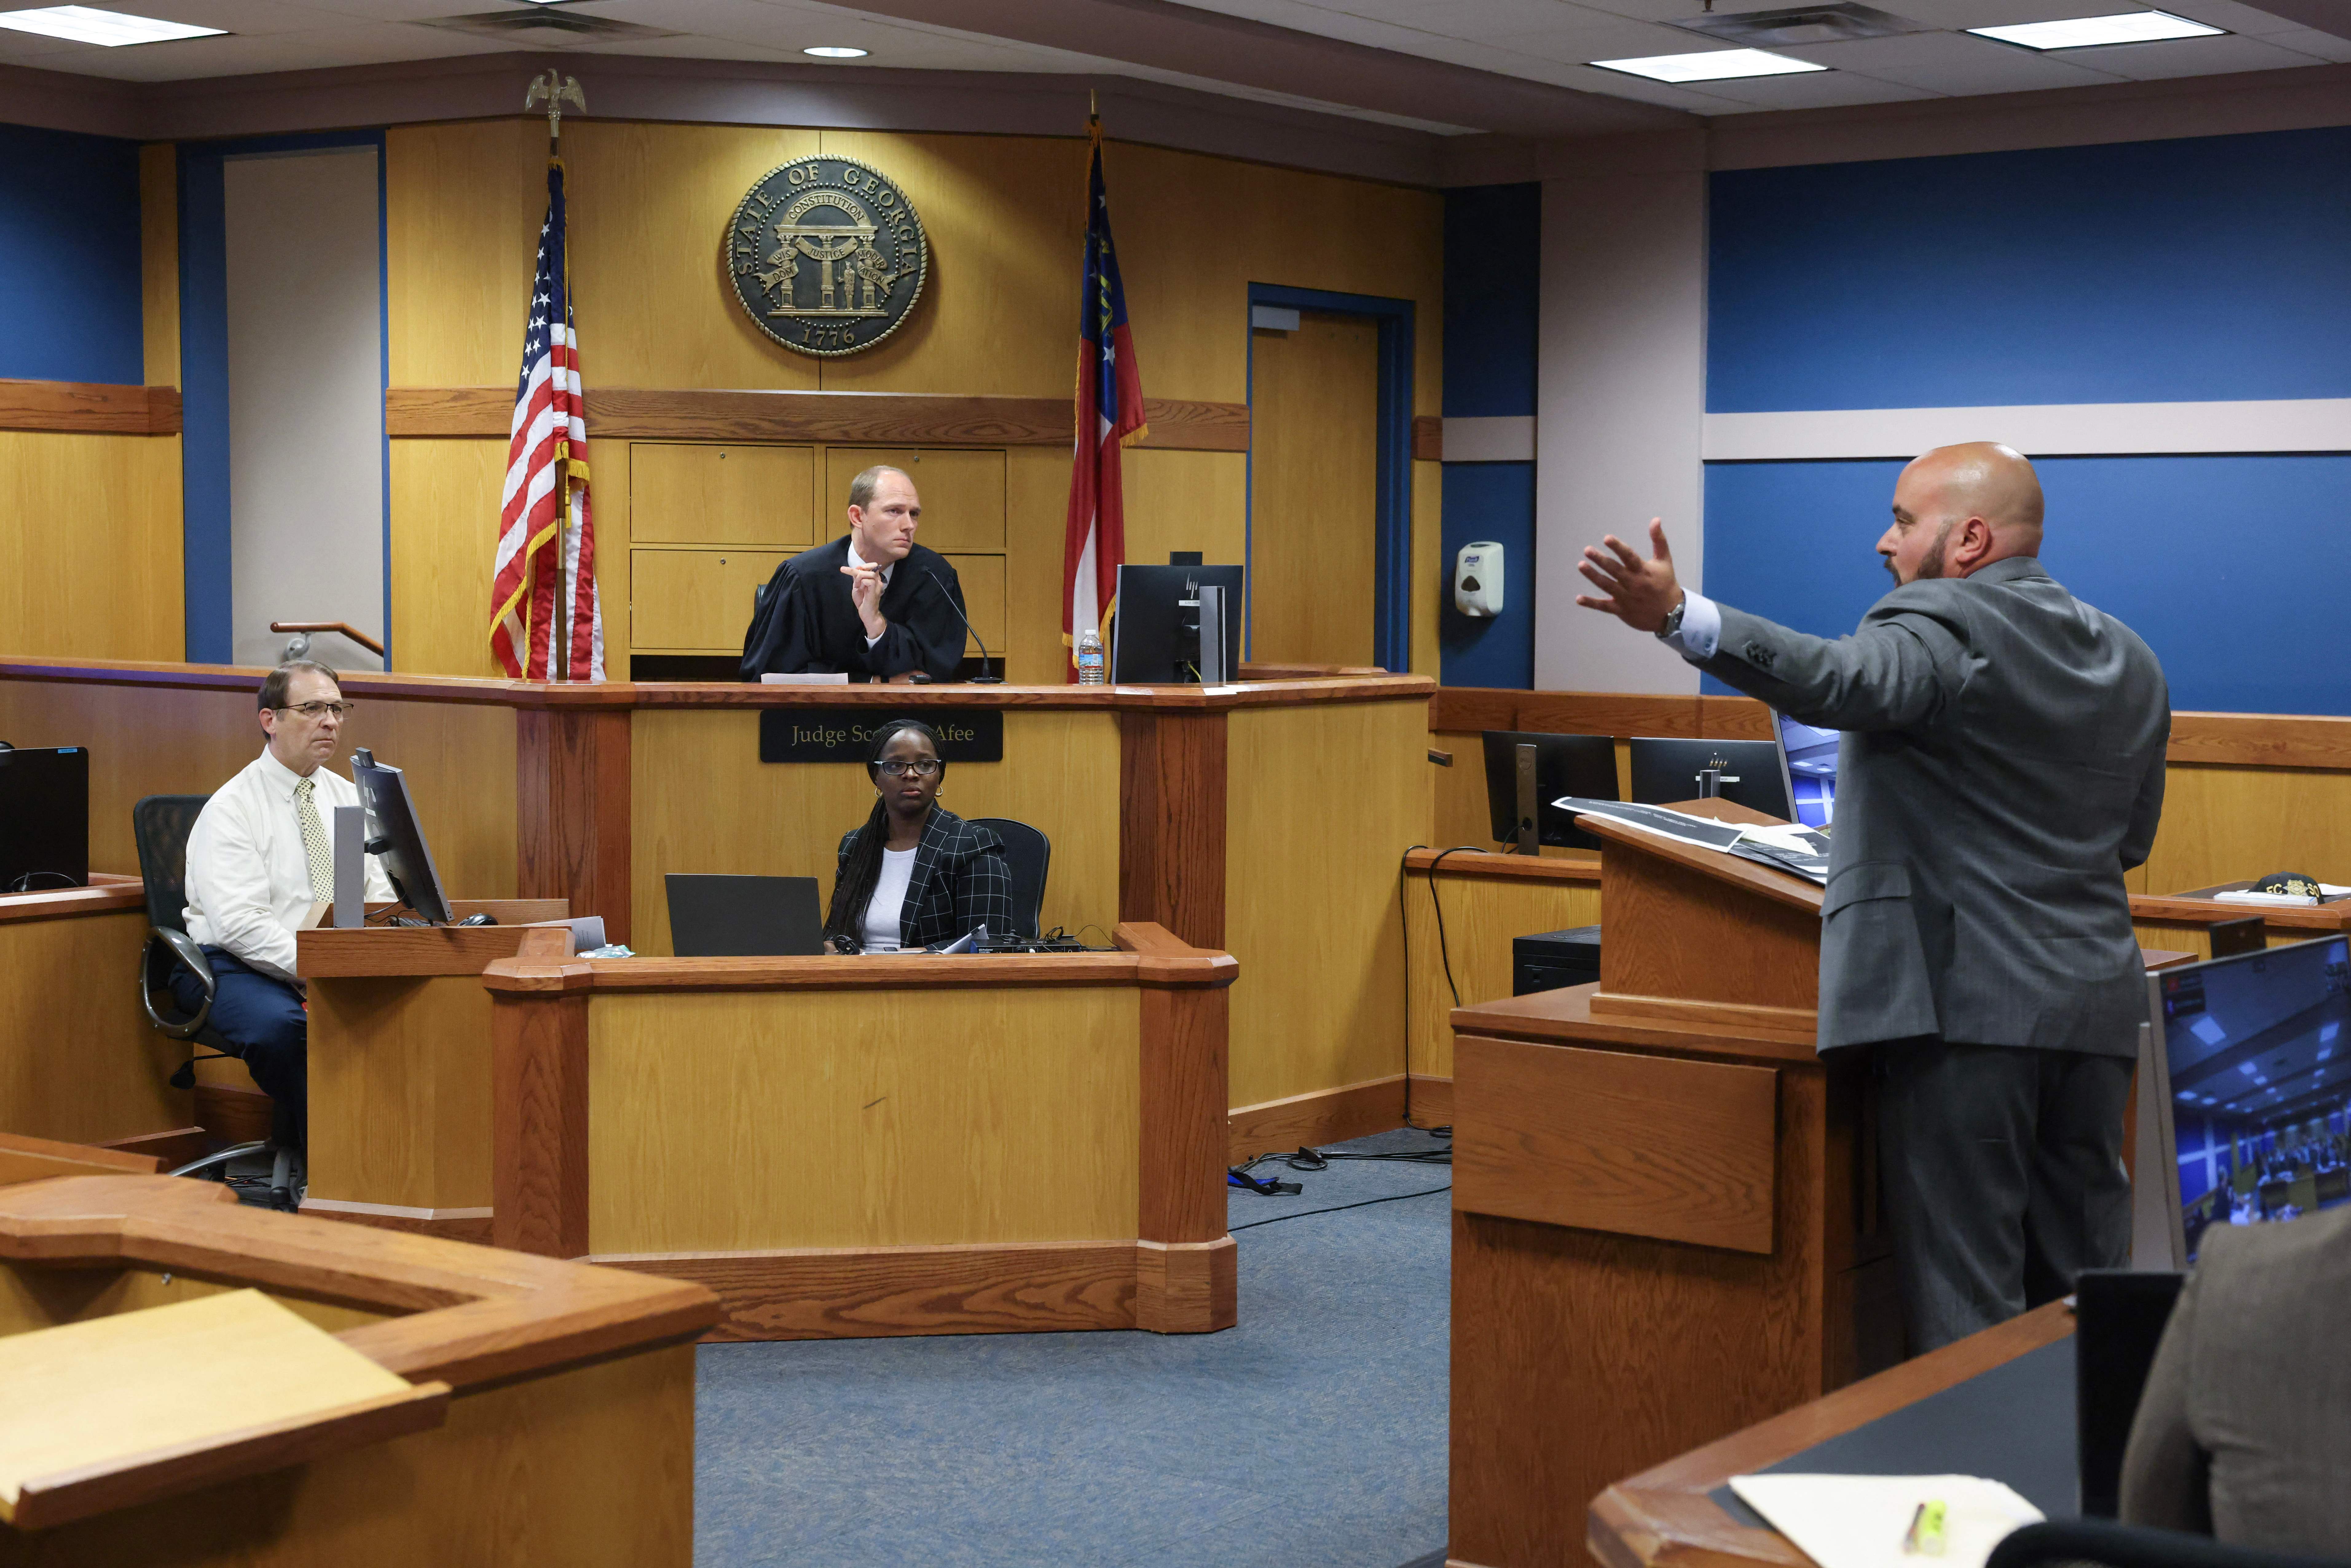 courtroom trial